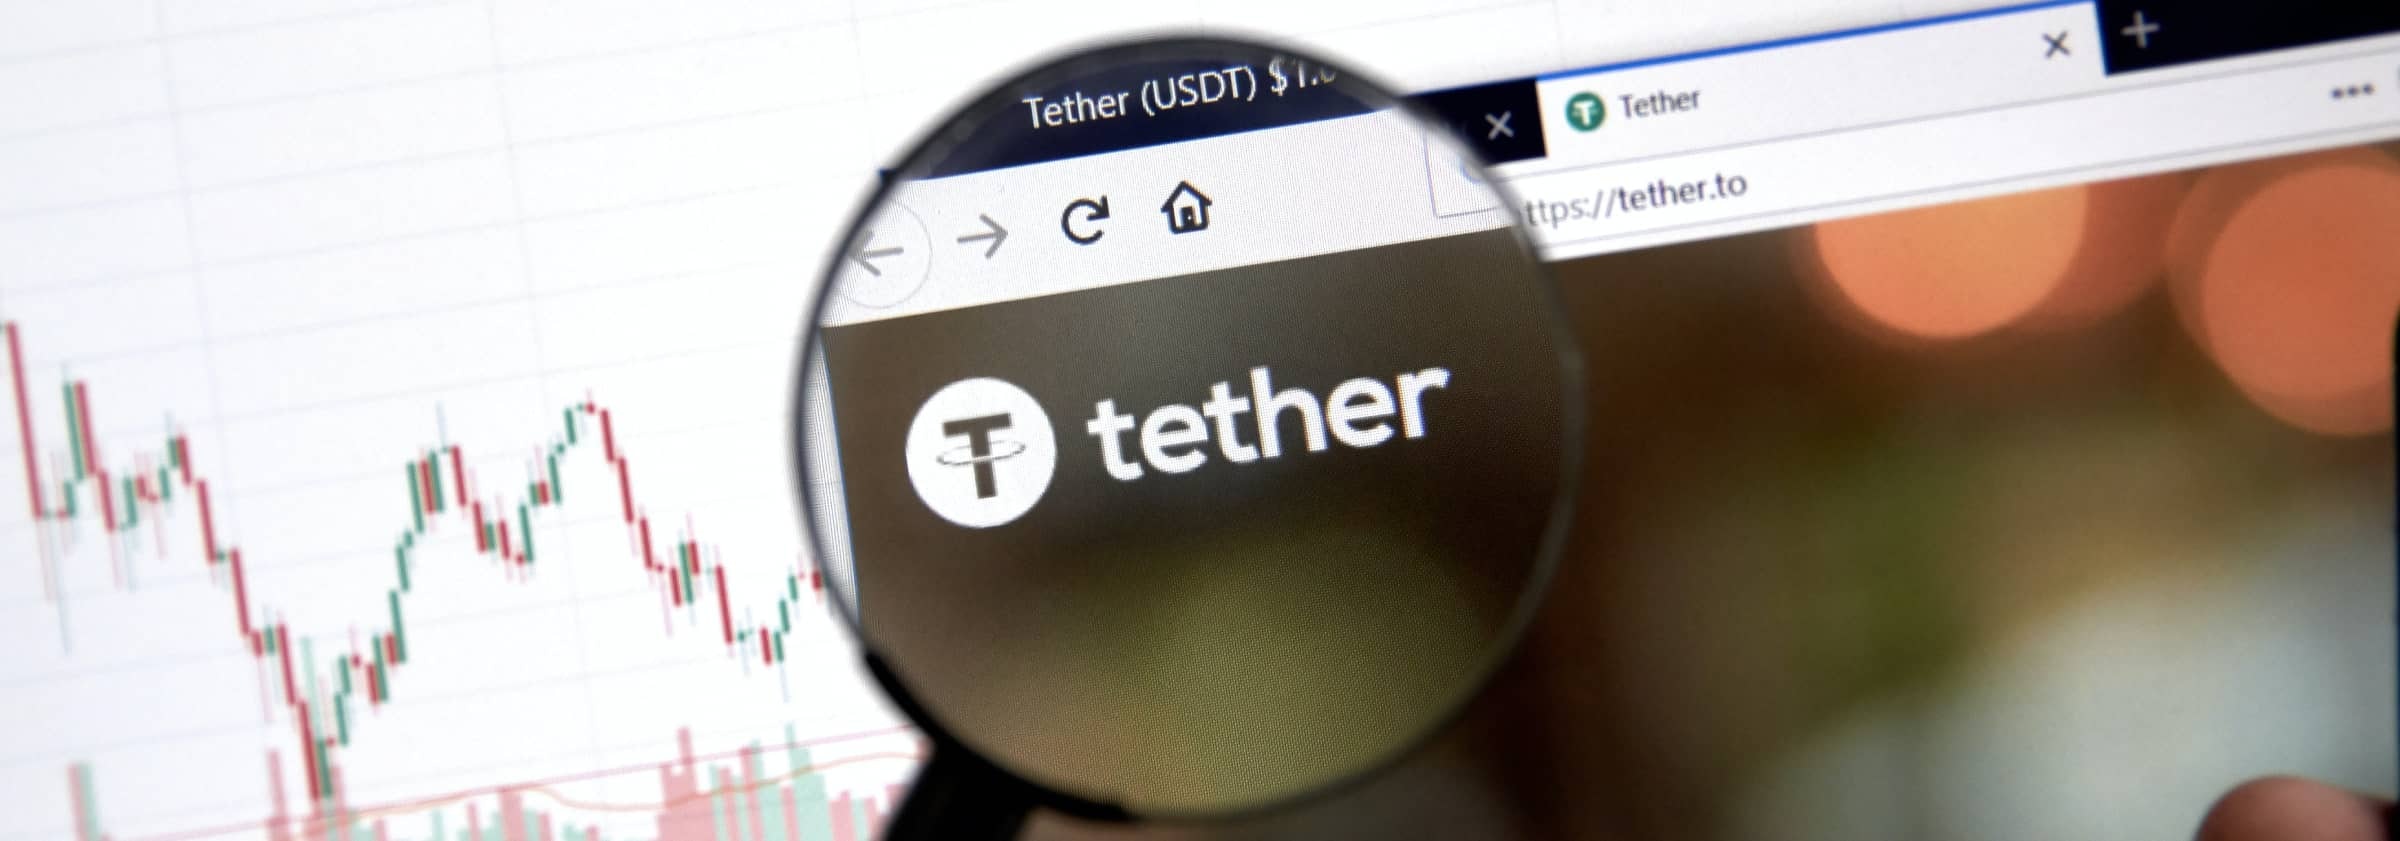 A brief guide on buying and investing in Tether